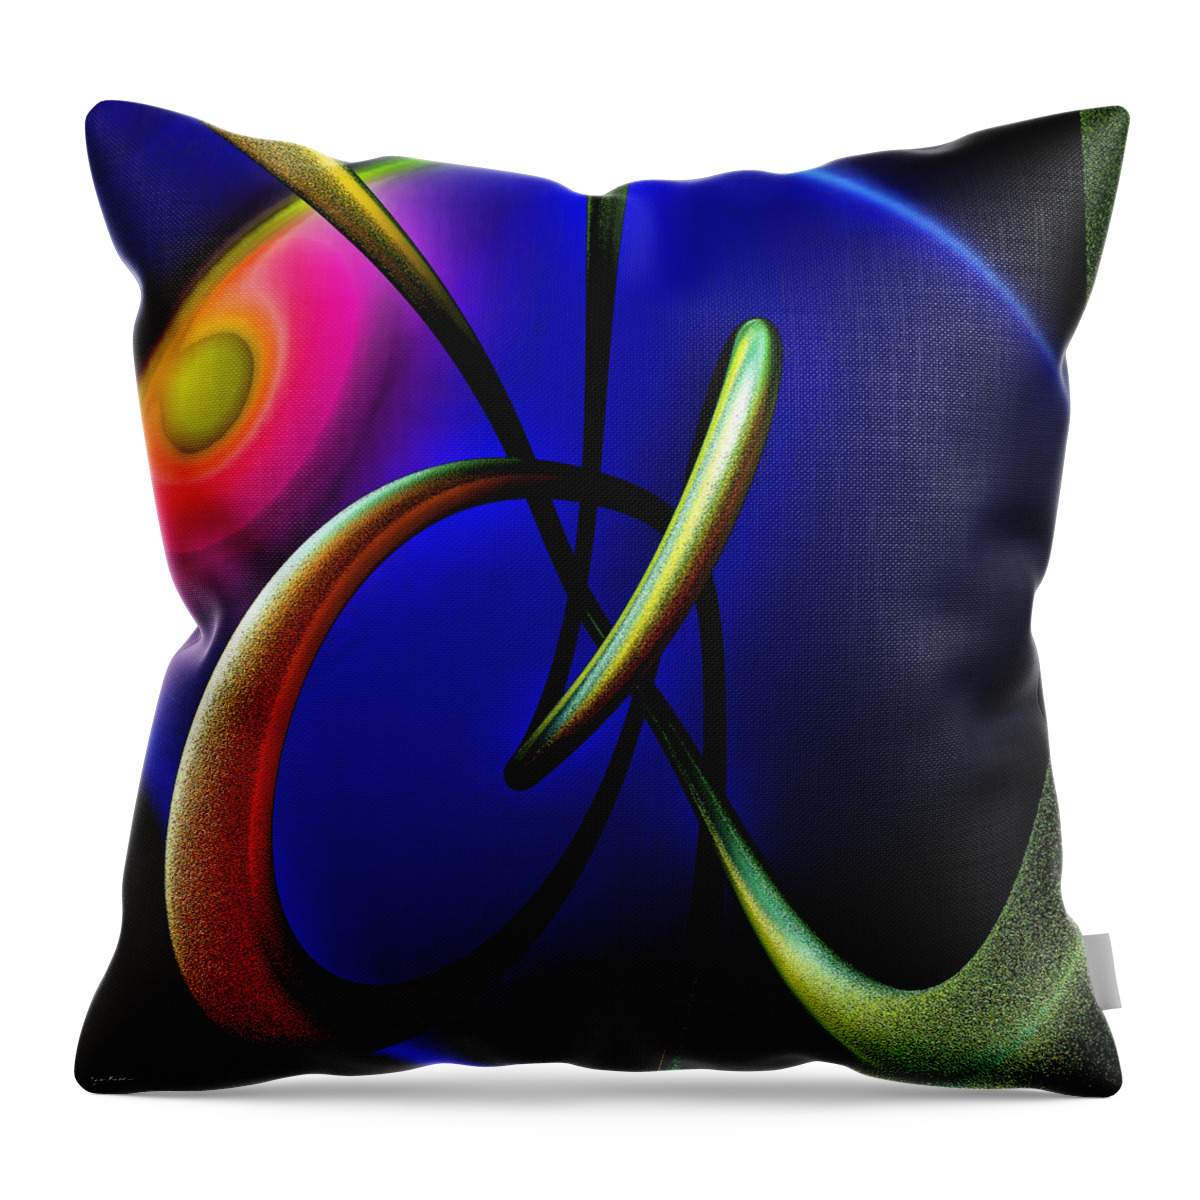 Abstract Throw Pillow featuring the digital art Digital Voyage by Tyler Robbins